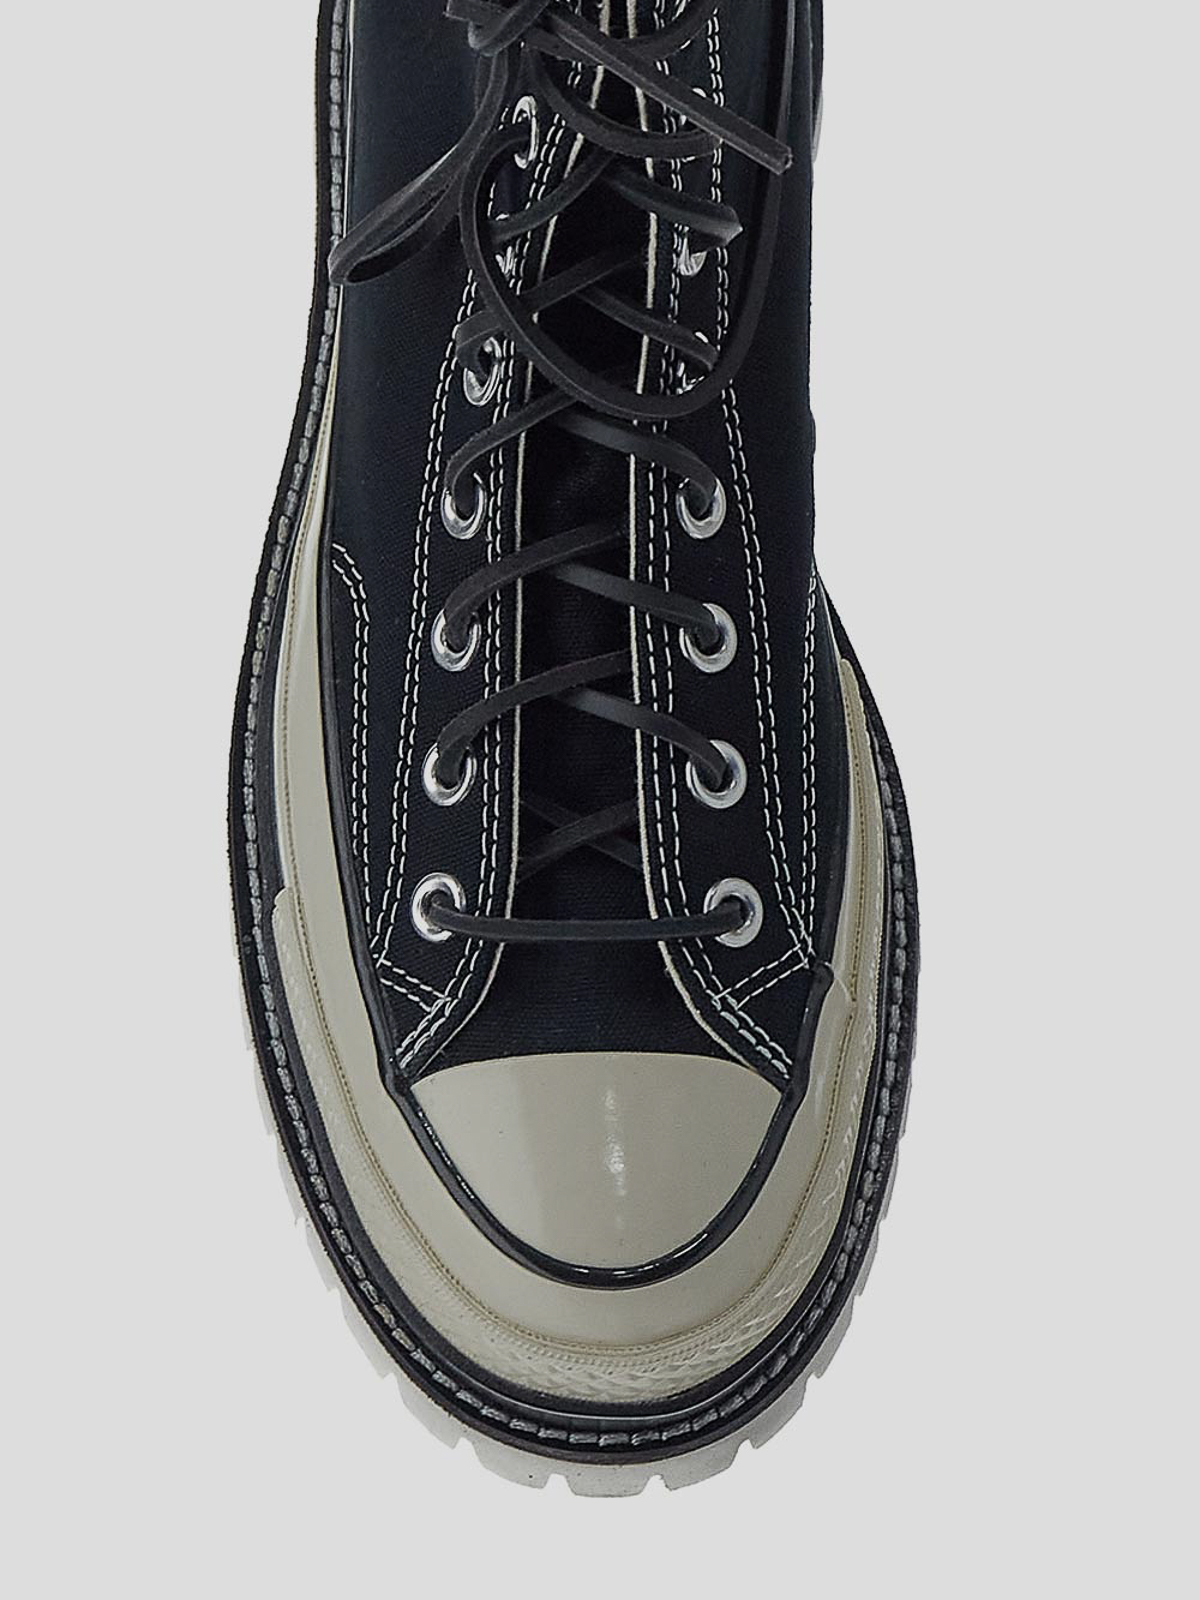 Trainers Converse - A06054C | Shop online at THEBS